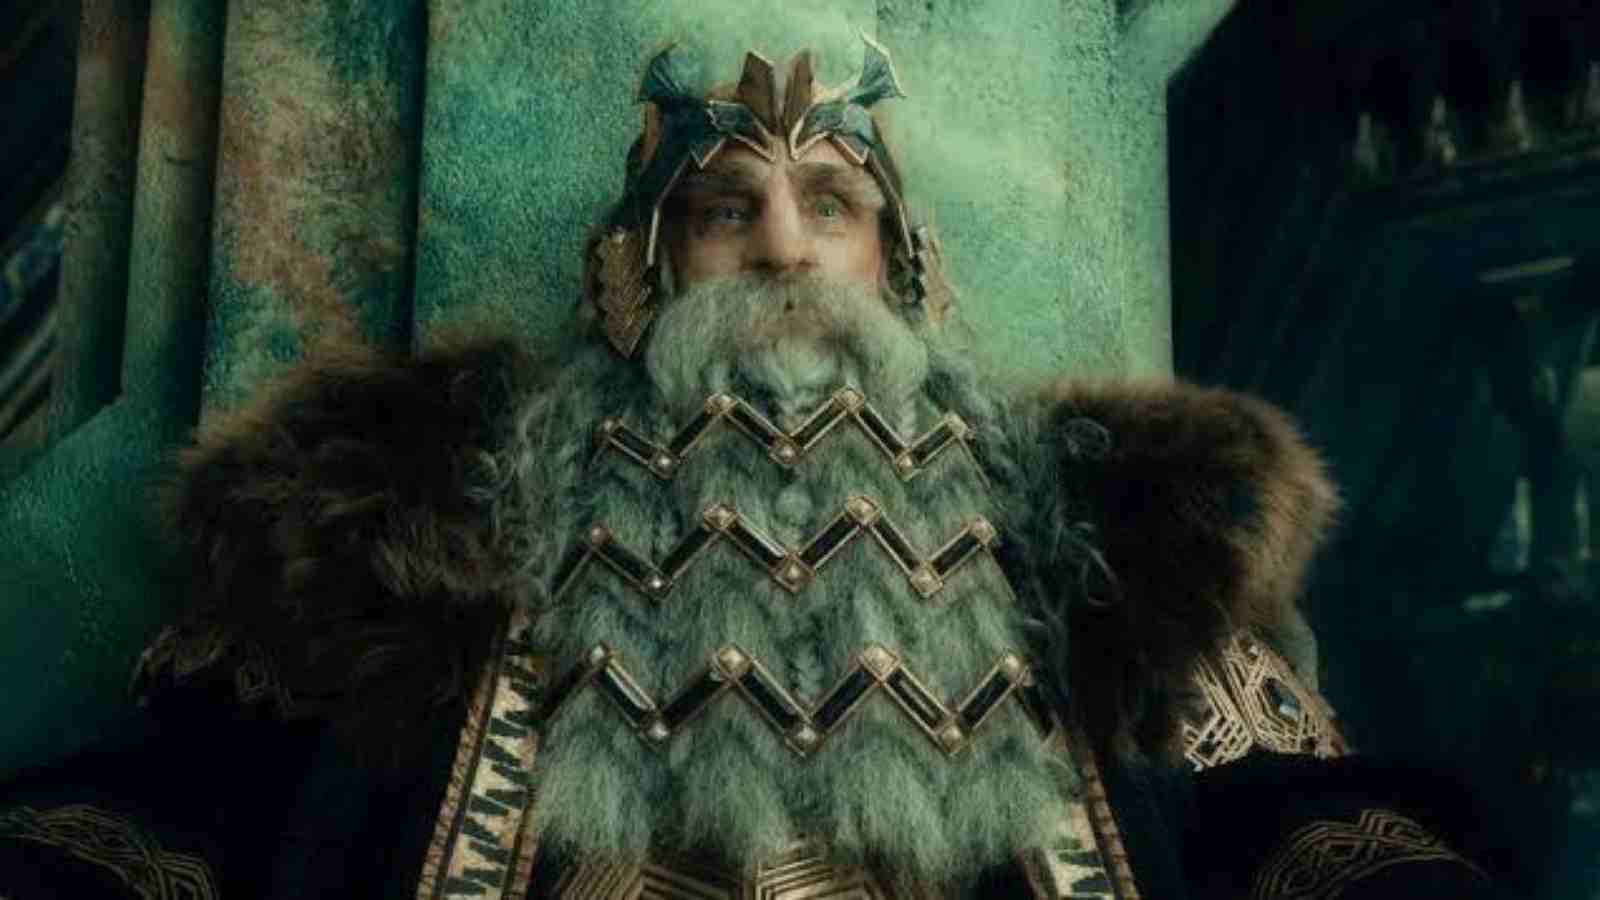 The dwarves of the Middle Earth in The Rings of Power